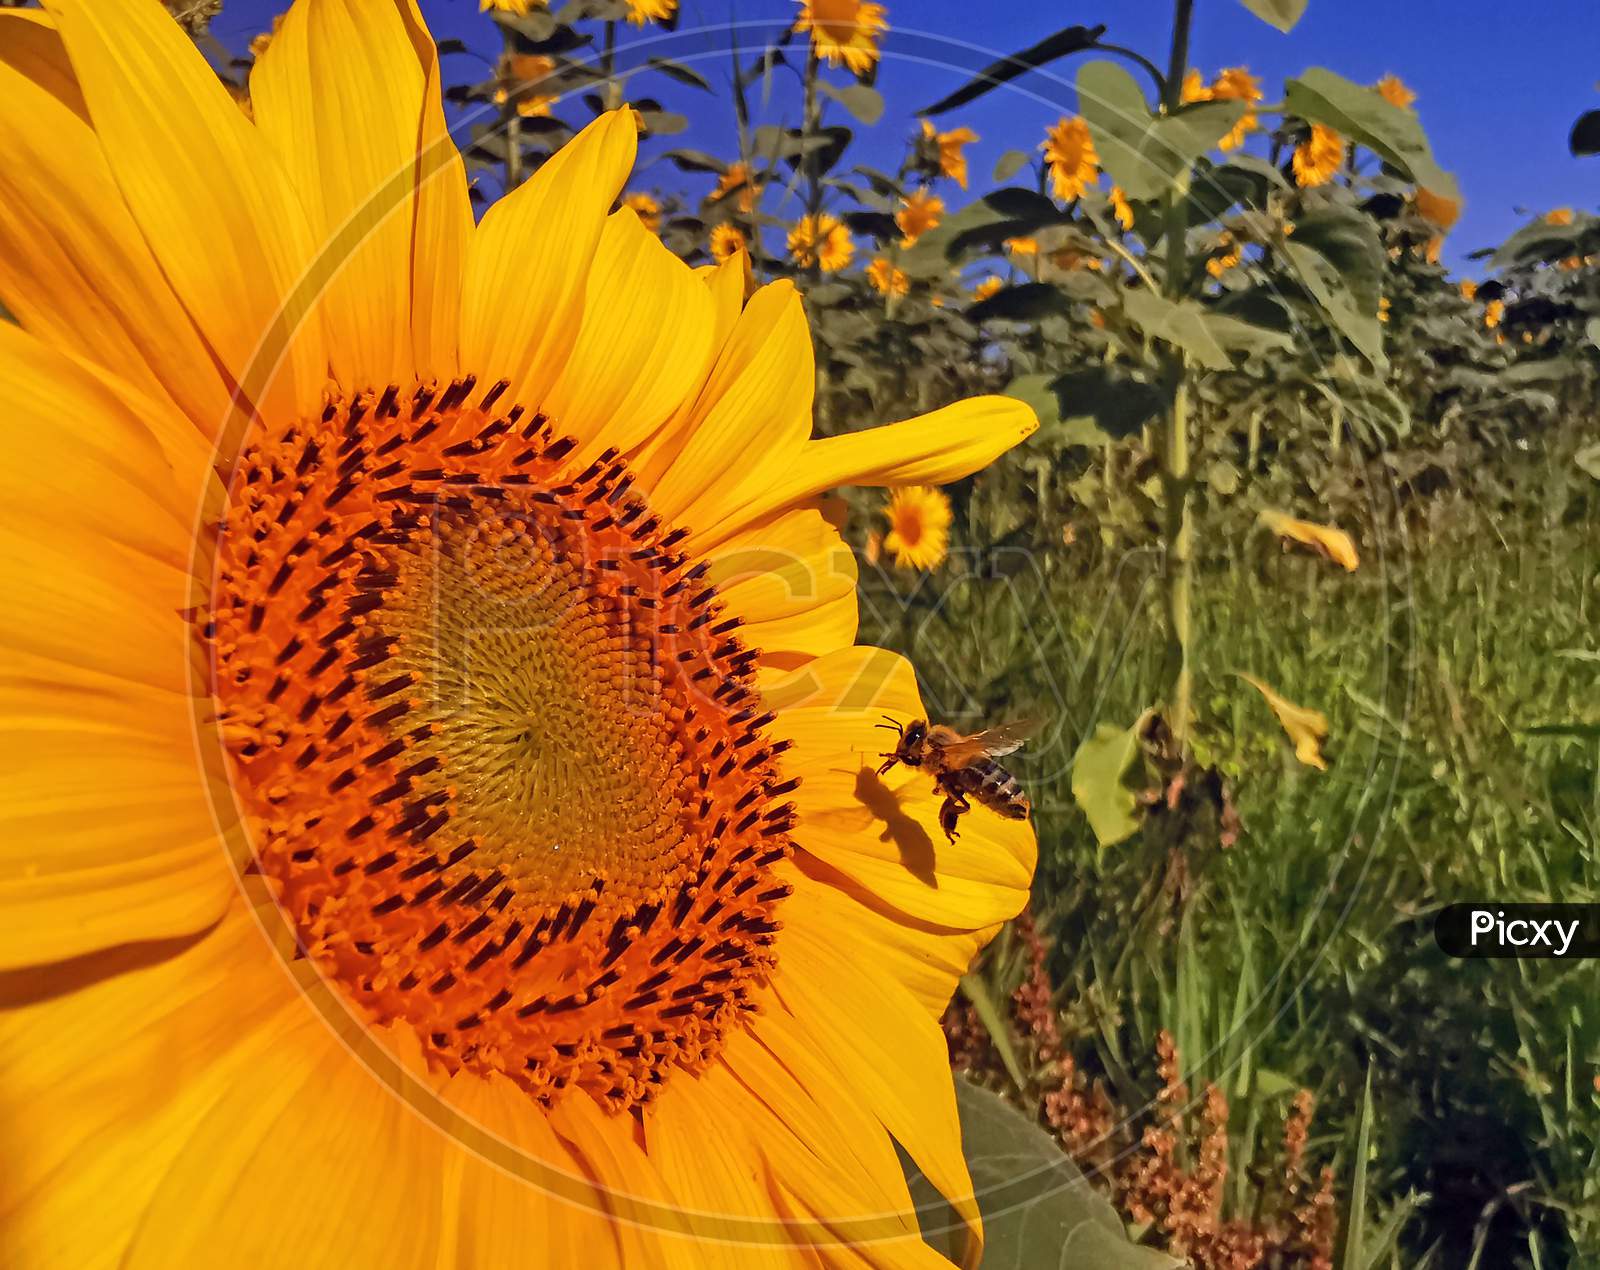 Bee Collecting Pollen From A Sunflower